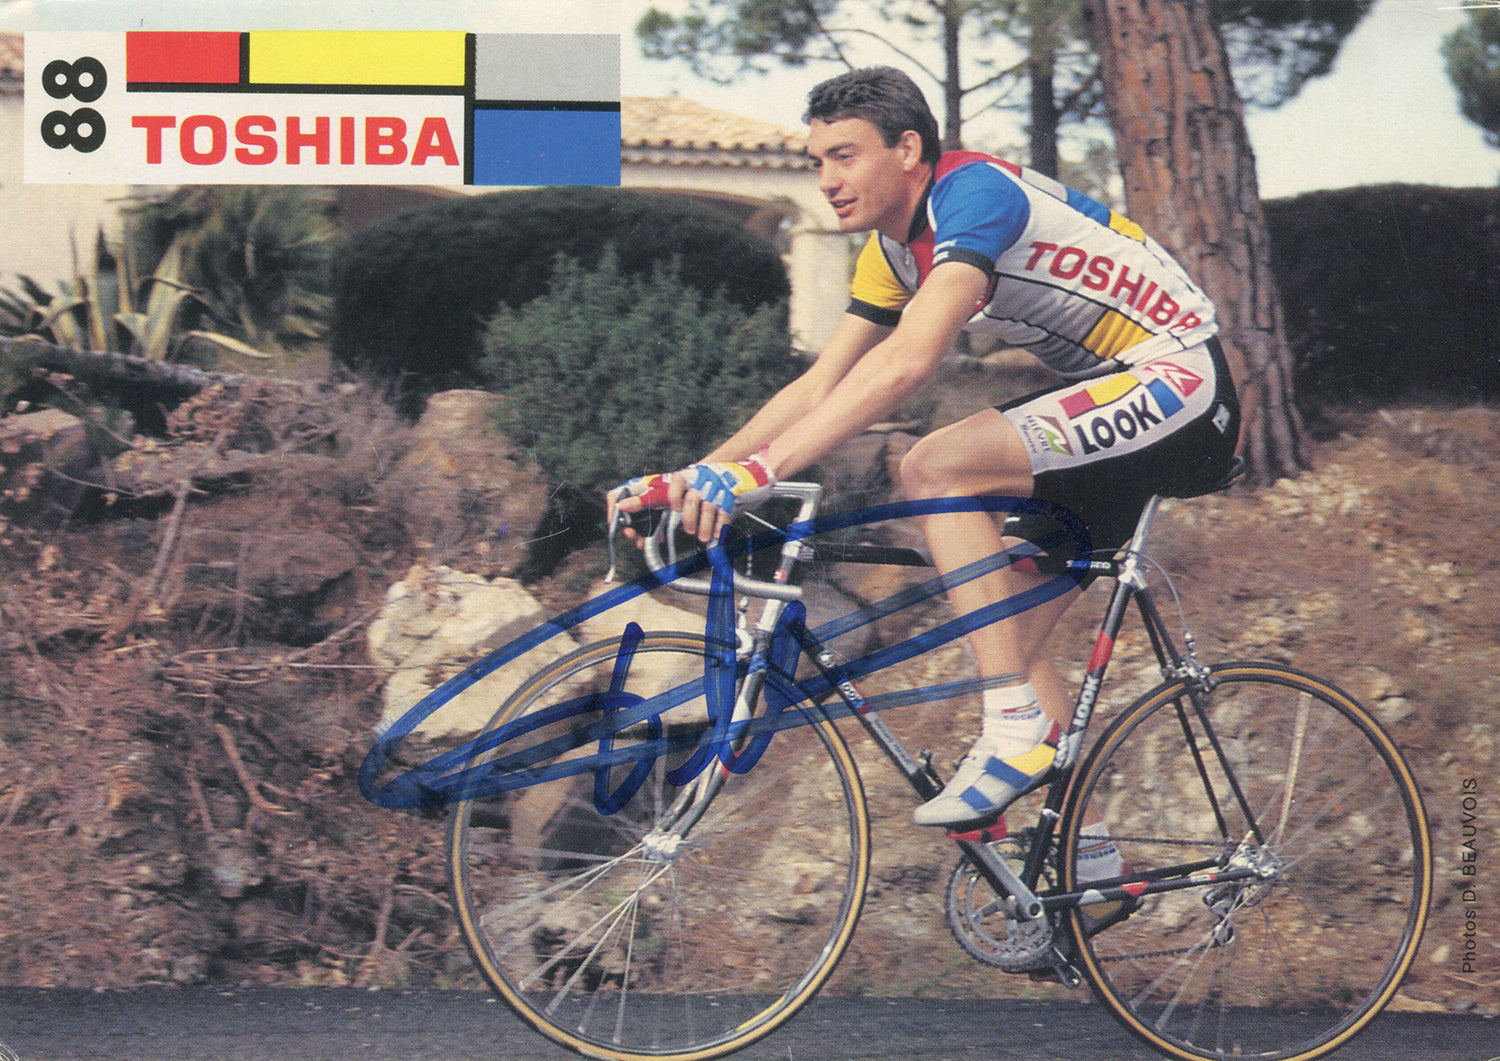 Fabrice Philipot joined the Toshiba Cycling Team in 1988 after 16 victories the previous three seasons.  He went onto win the young rider competition at the 1989 Tour de France.